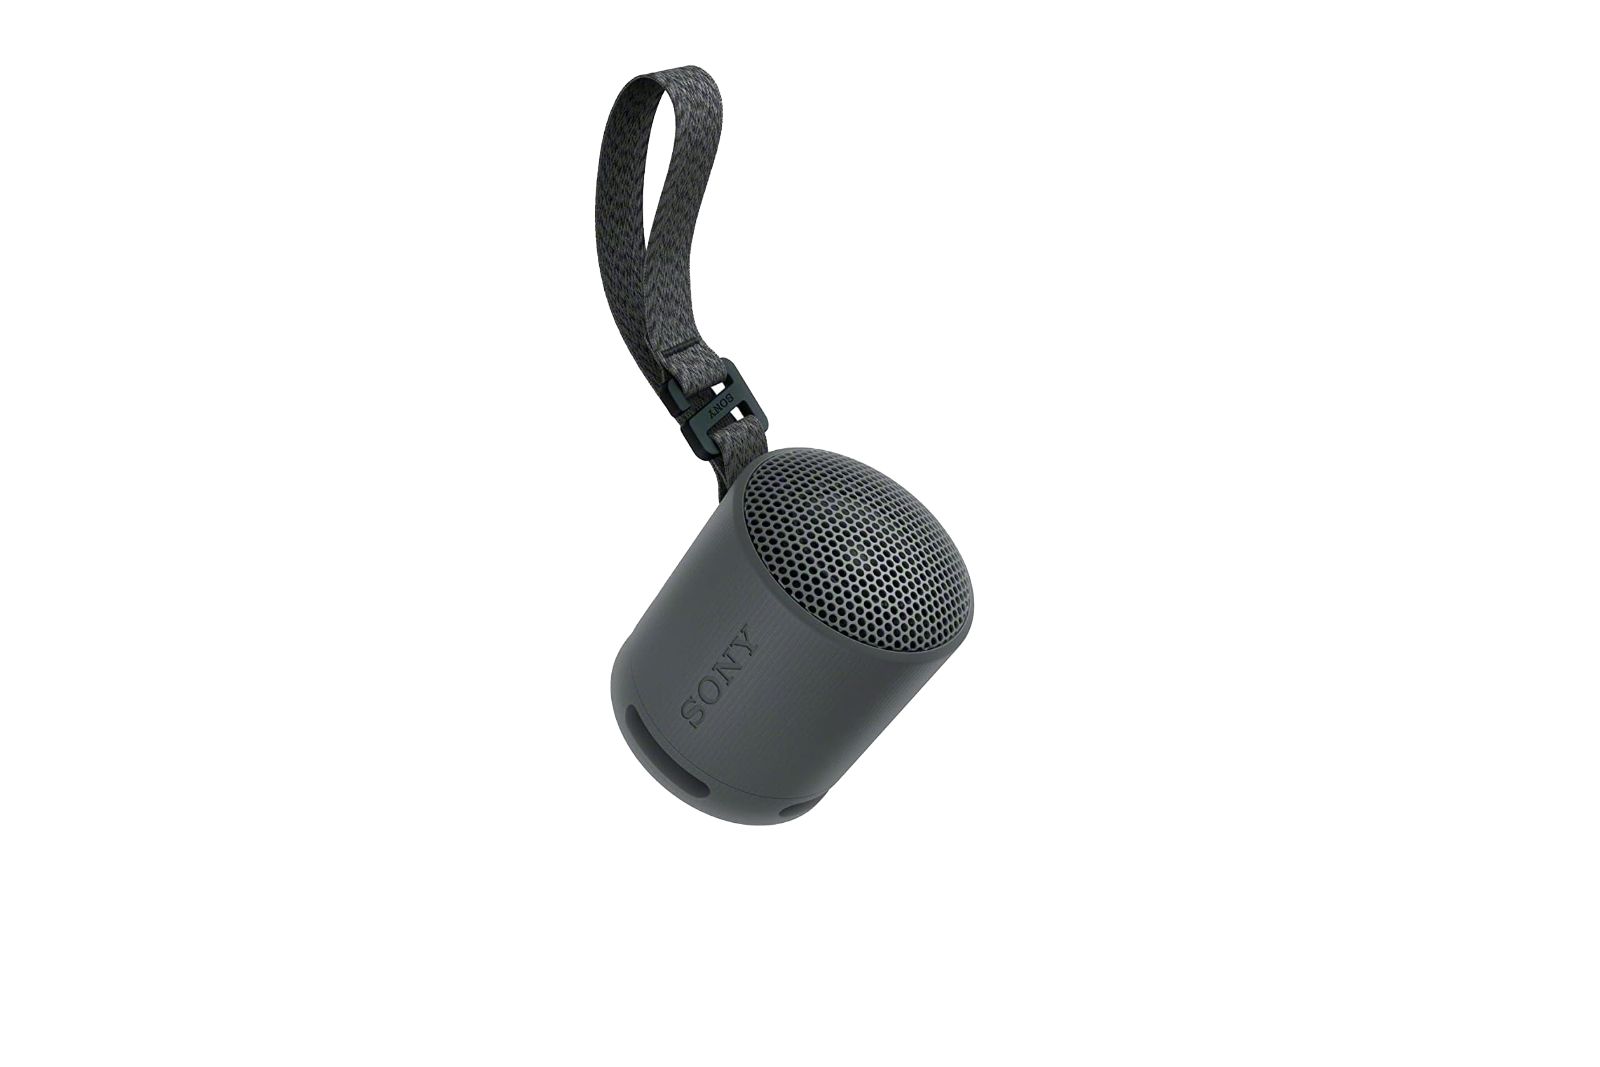 A tiny gray speaker with a strap coming out of the top.